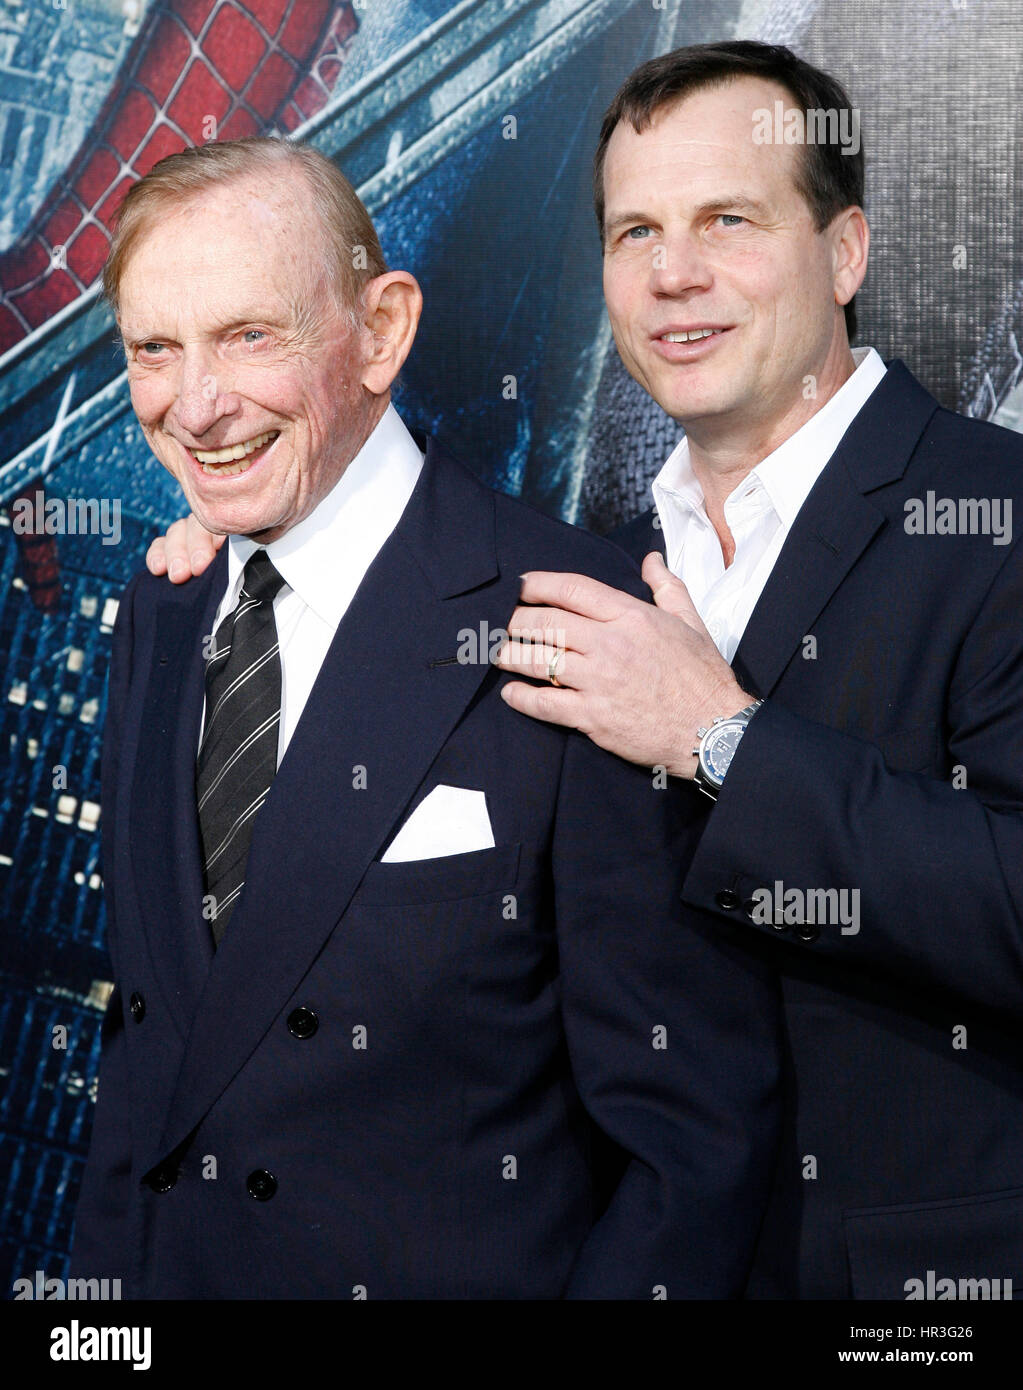 John Paxton and his son Bill Paxton (R) attend the premiere of 'Spiderman 3' during the Tribeca Film Festival on April 30, 2007 in Astoria, Queens, New York City. RD/MediaPunch Stock Photo